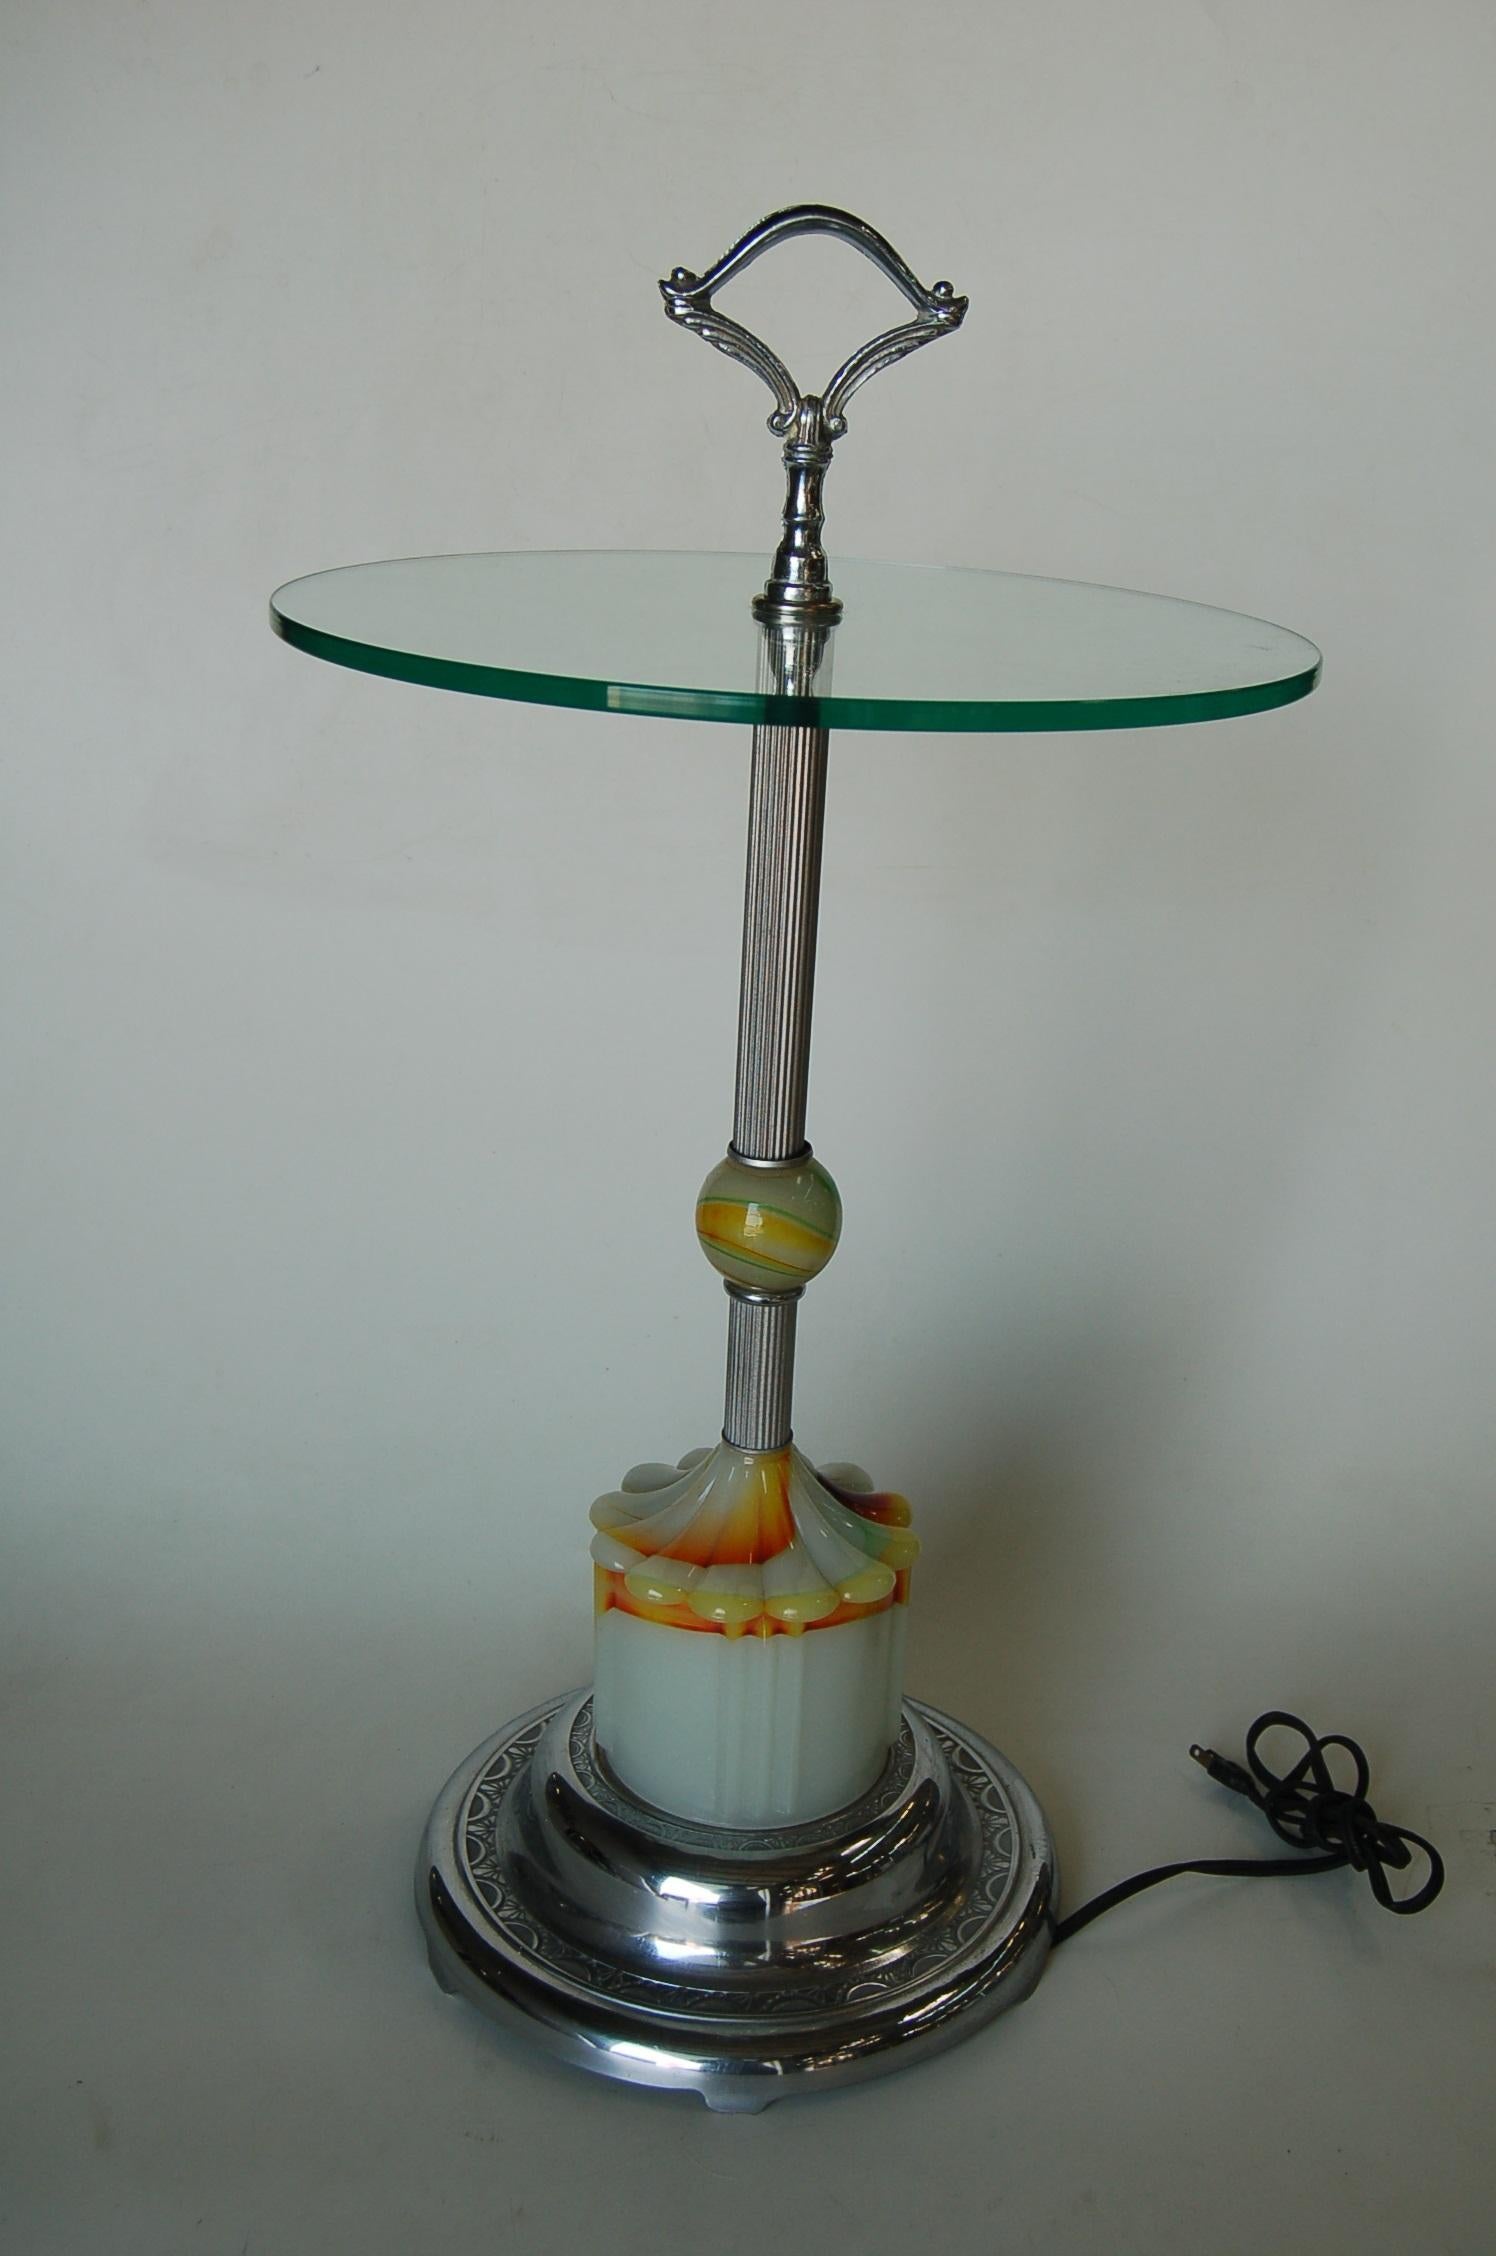 This 1930s Art Deco side accent table or end table made of agate glass, the bottom of which lights up, and a in chrome finial in that crowns the clear glass top. The table rests on a flower-shaped agate Illuminating base; the on /off switch is